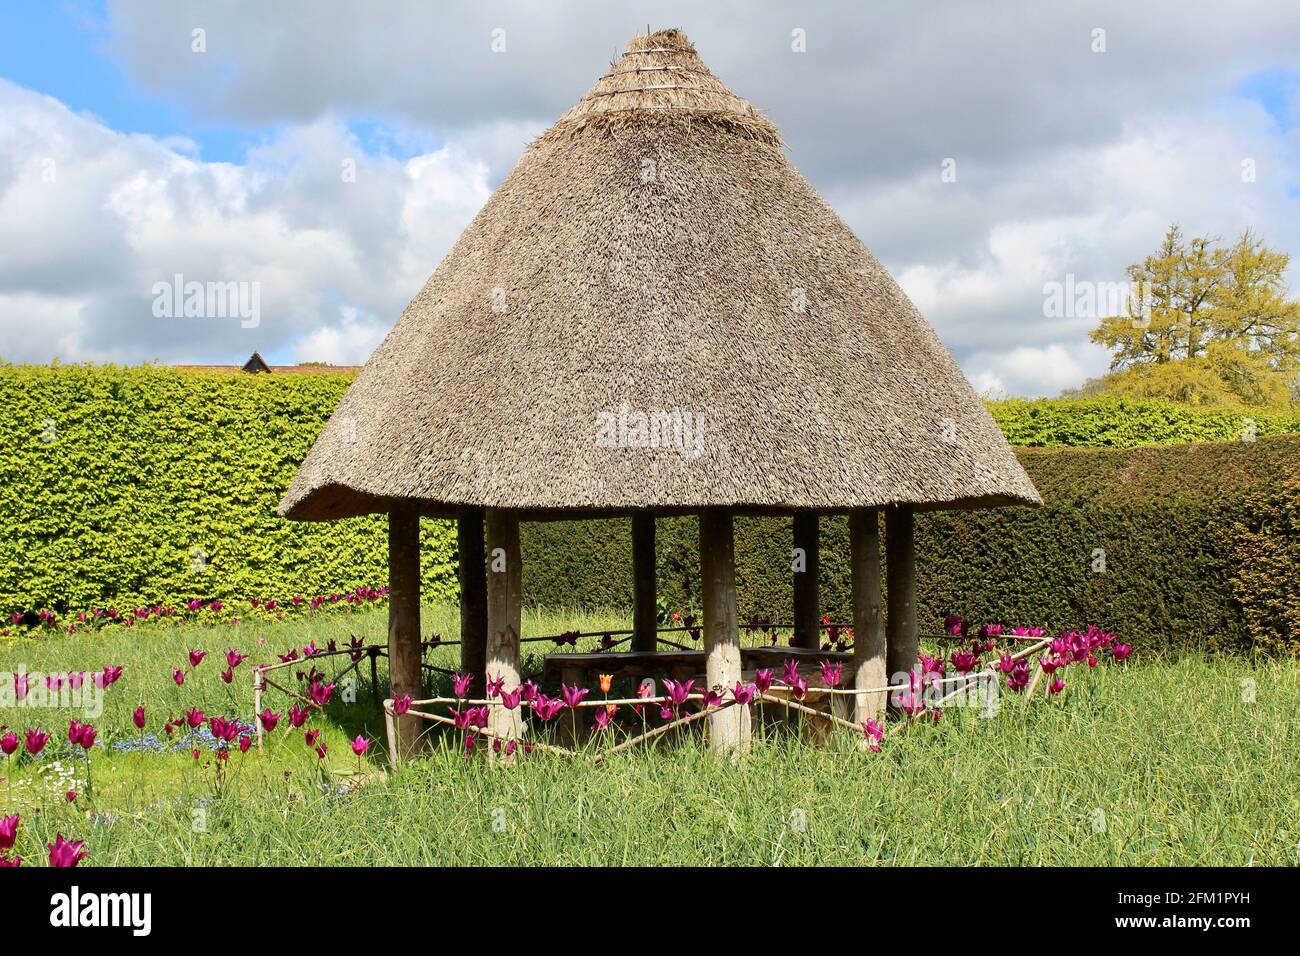 Arundel Castle Tulip Festival - 2021 - Rustic thatched summerhouse in a meadow backed by hedging. Stock Photo